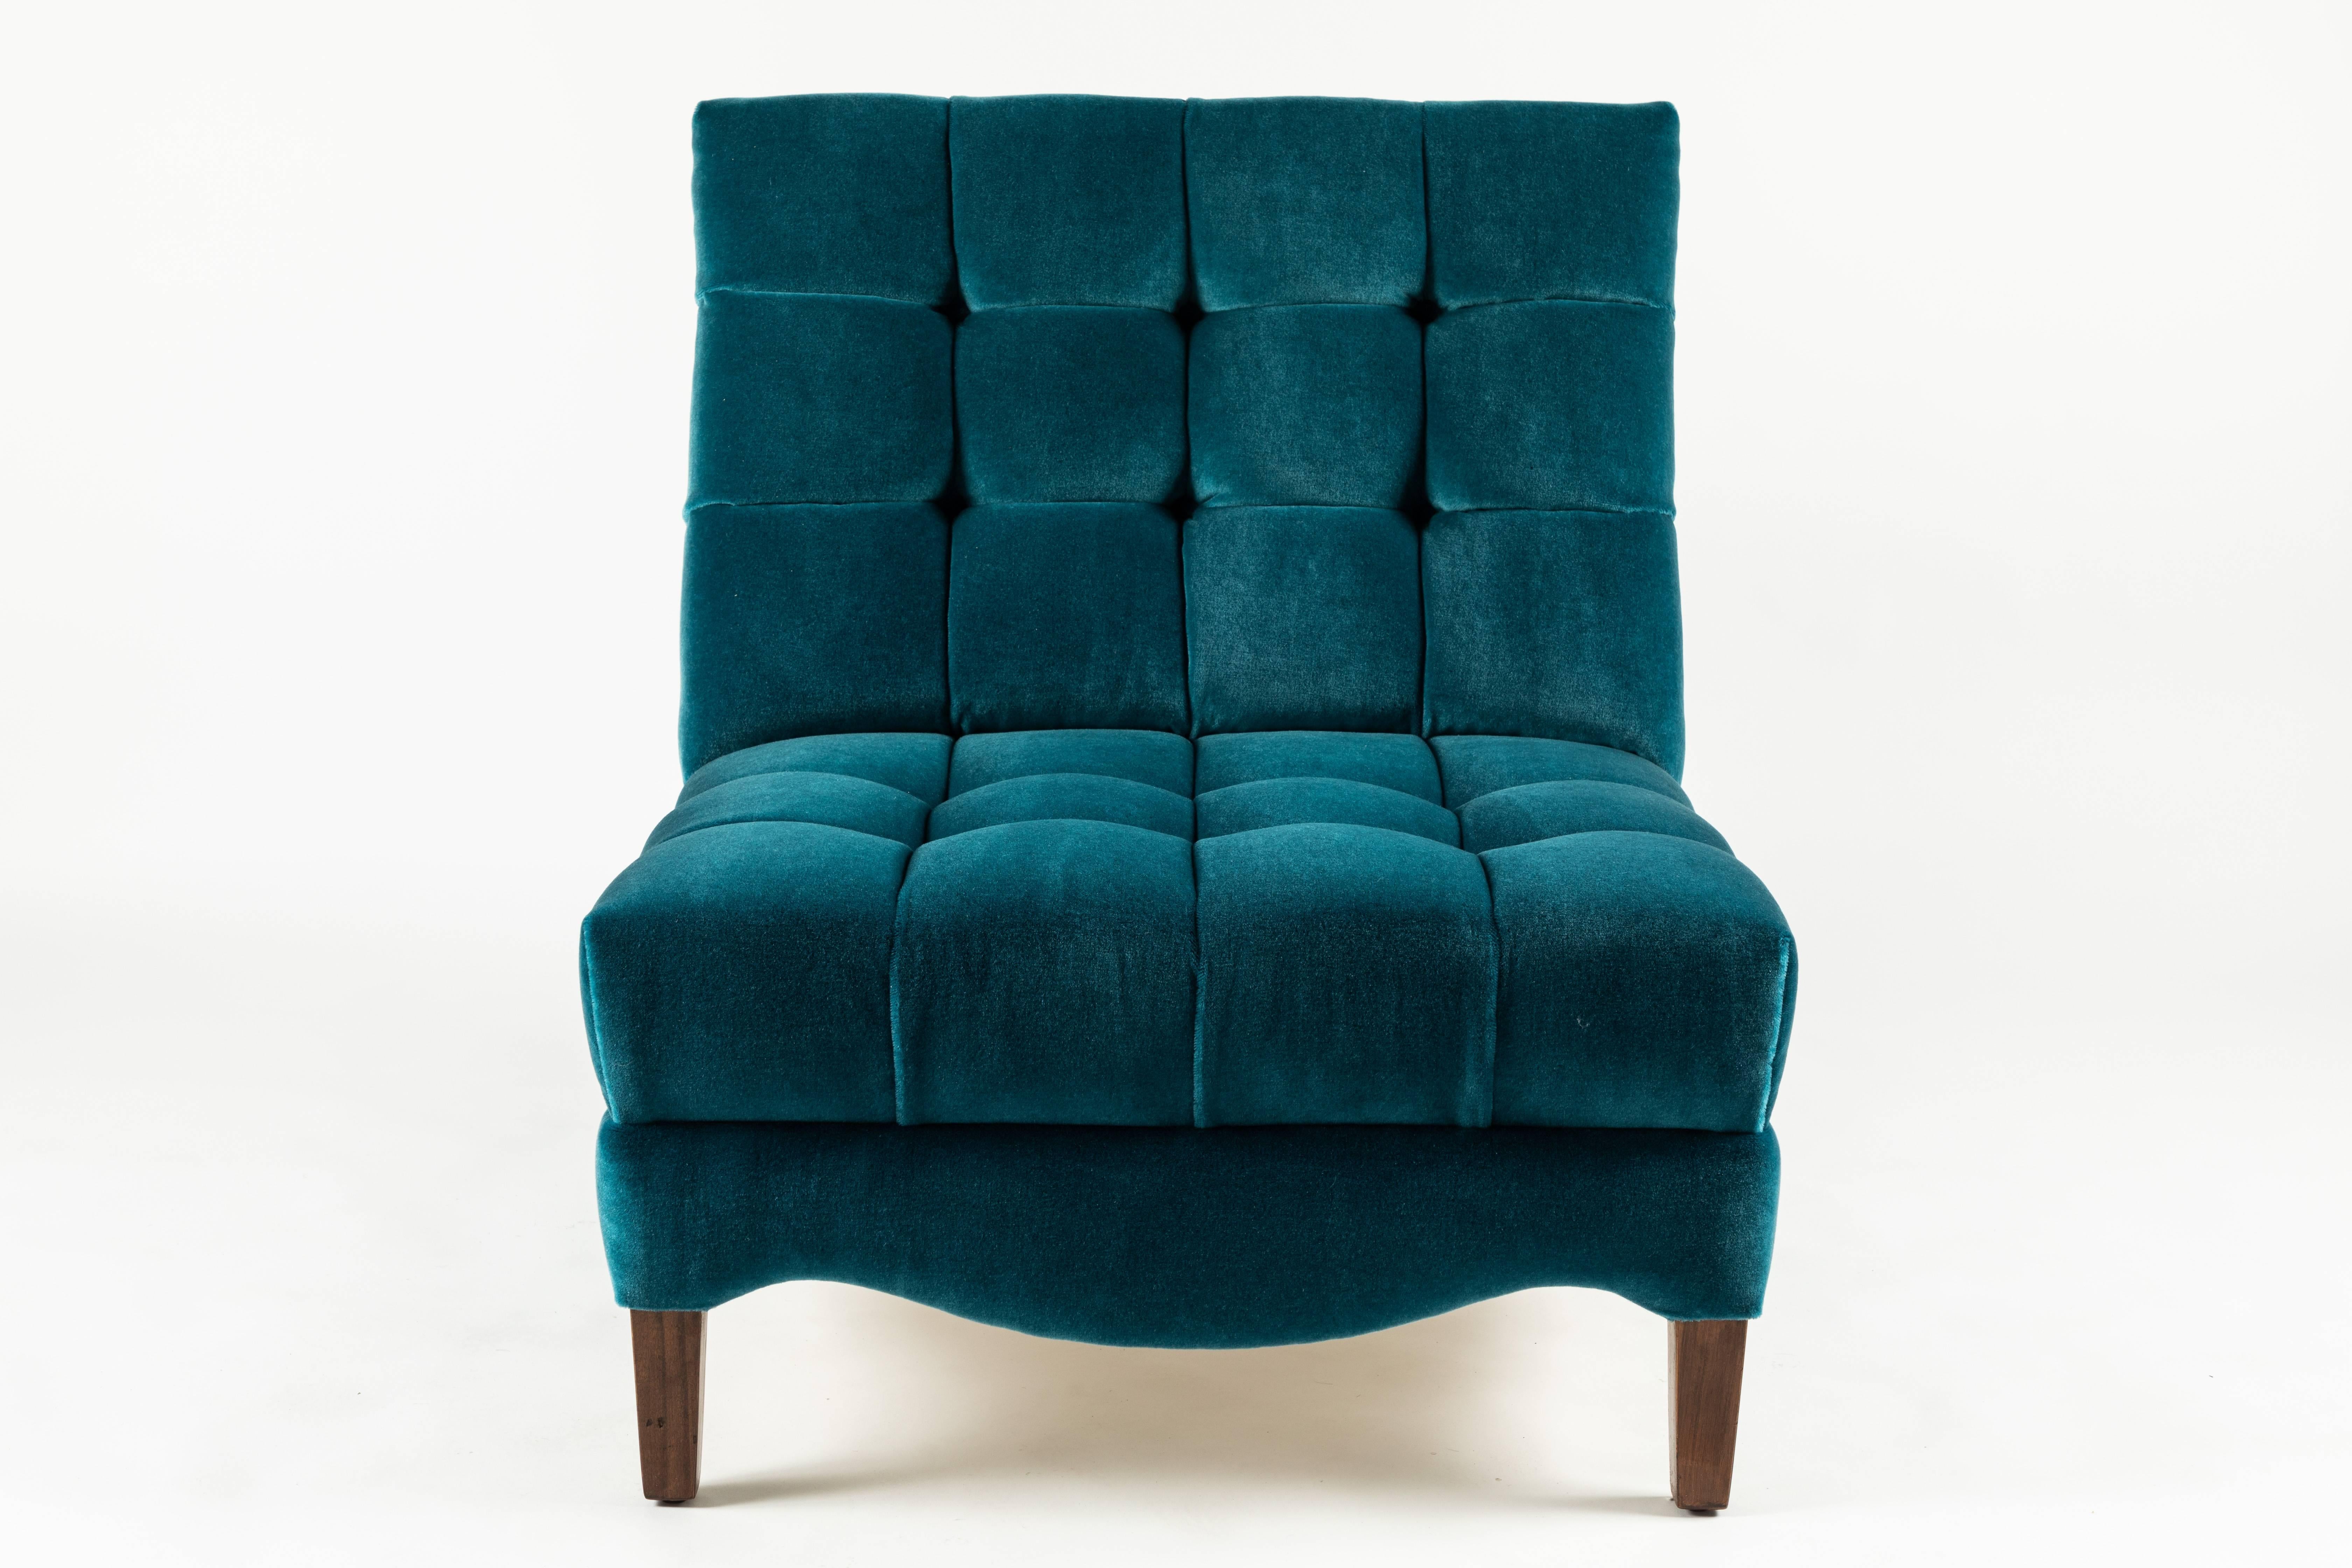 American Pair of Biscuit-Tufted Slipper Chairs Covered in Teal Mohair